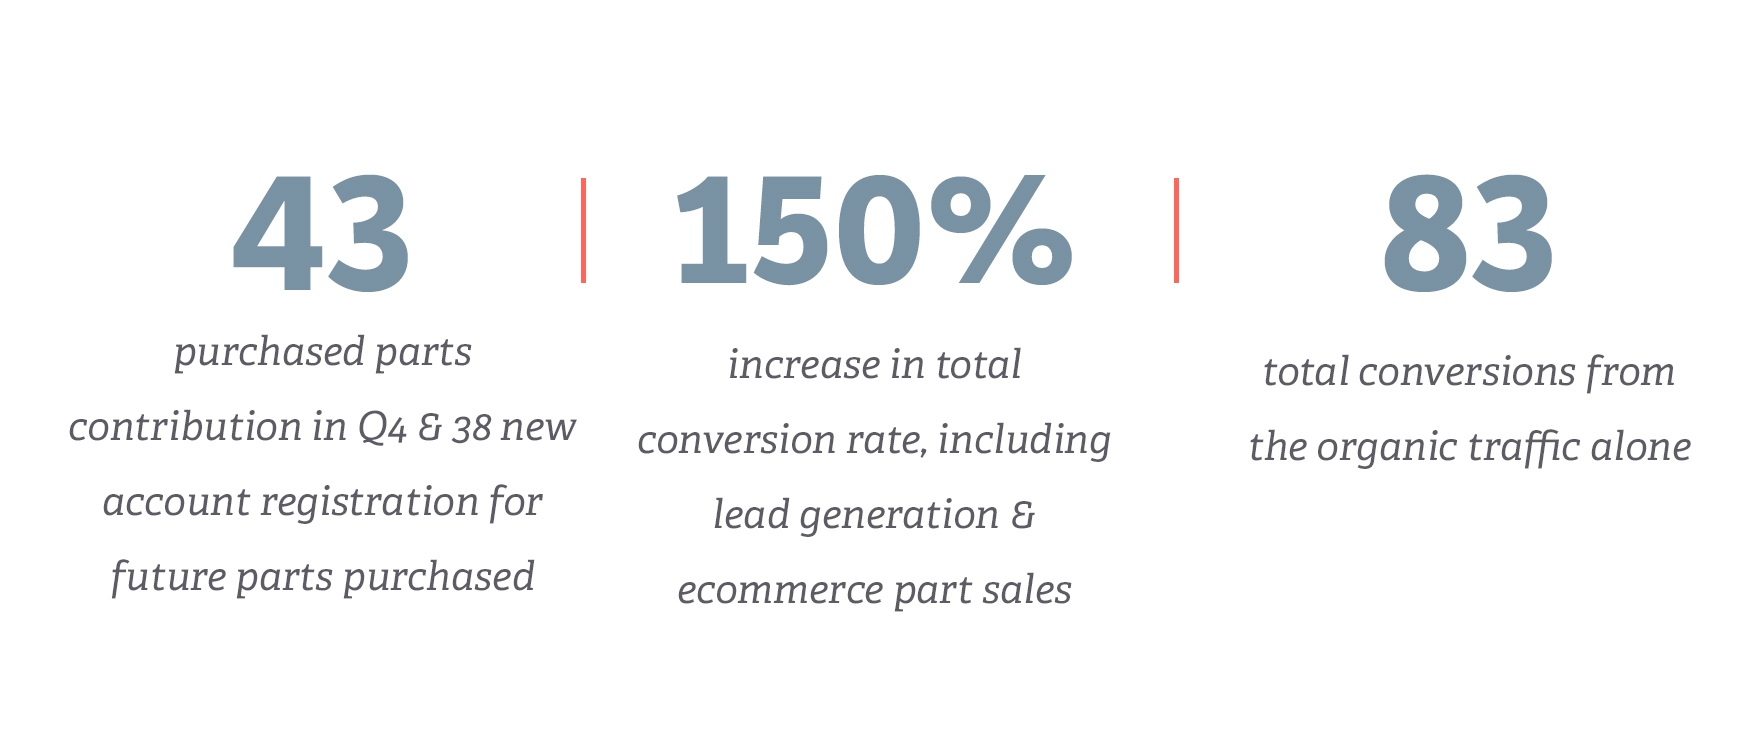 43 purchased parts, 38 part registration, 150% conversion rate increase, and 83 total conversions.